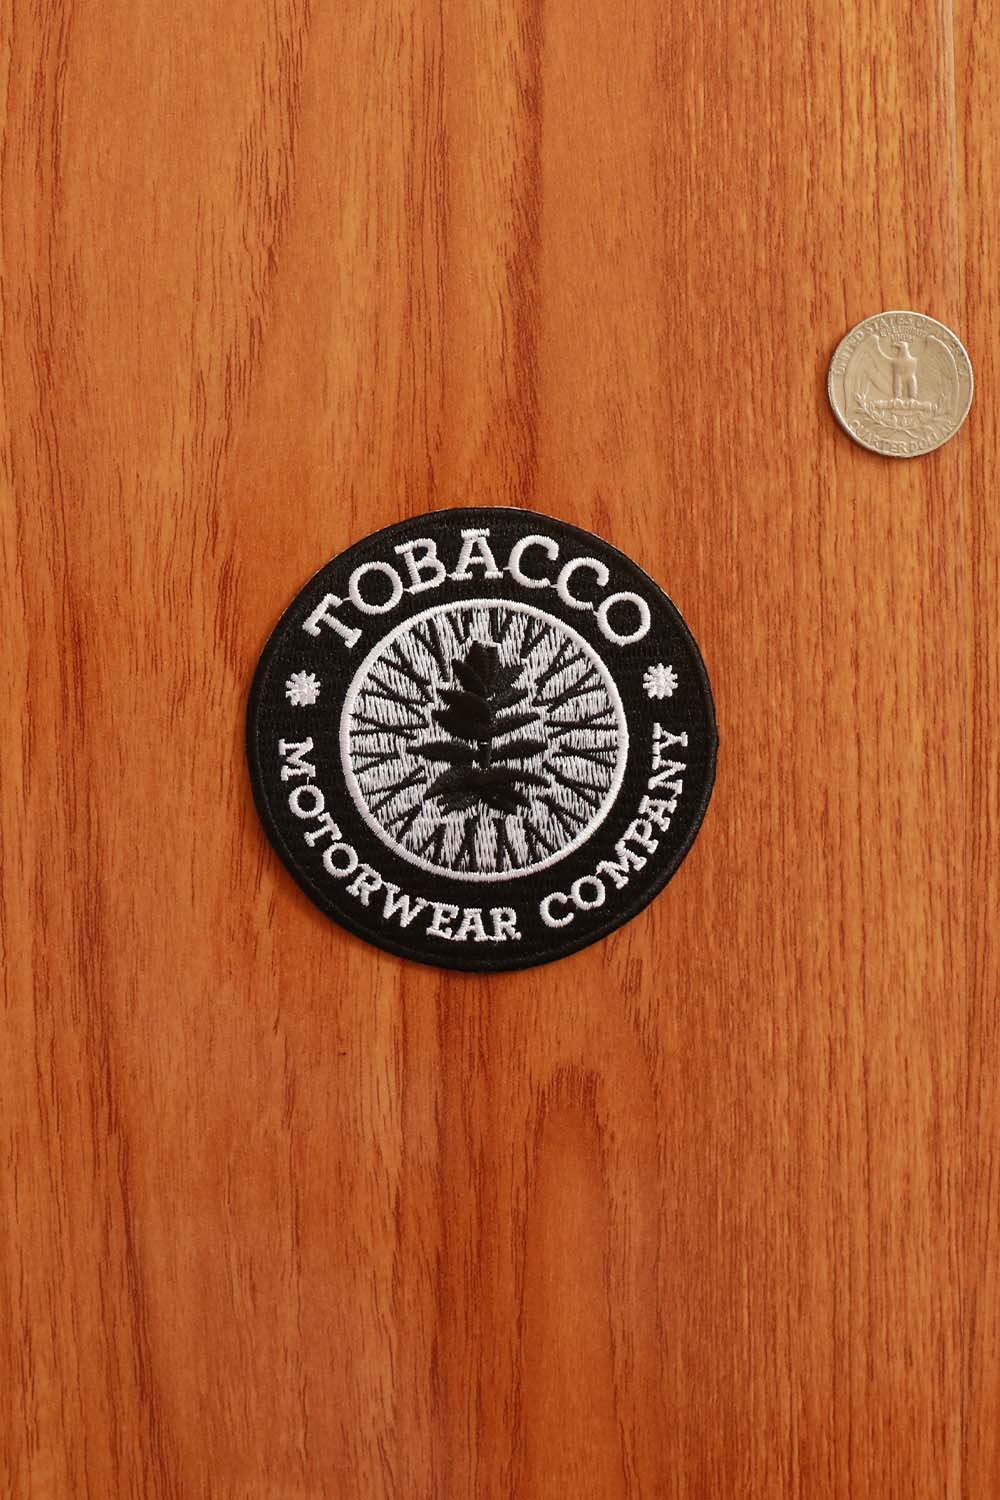 Tobacco Seal Patch